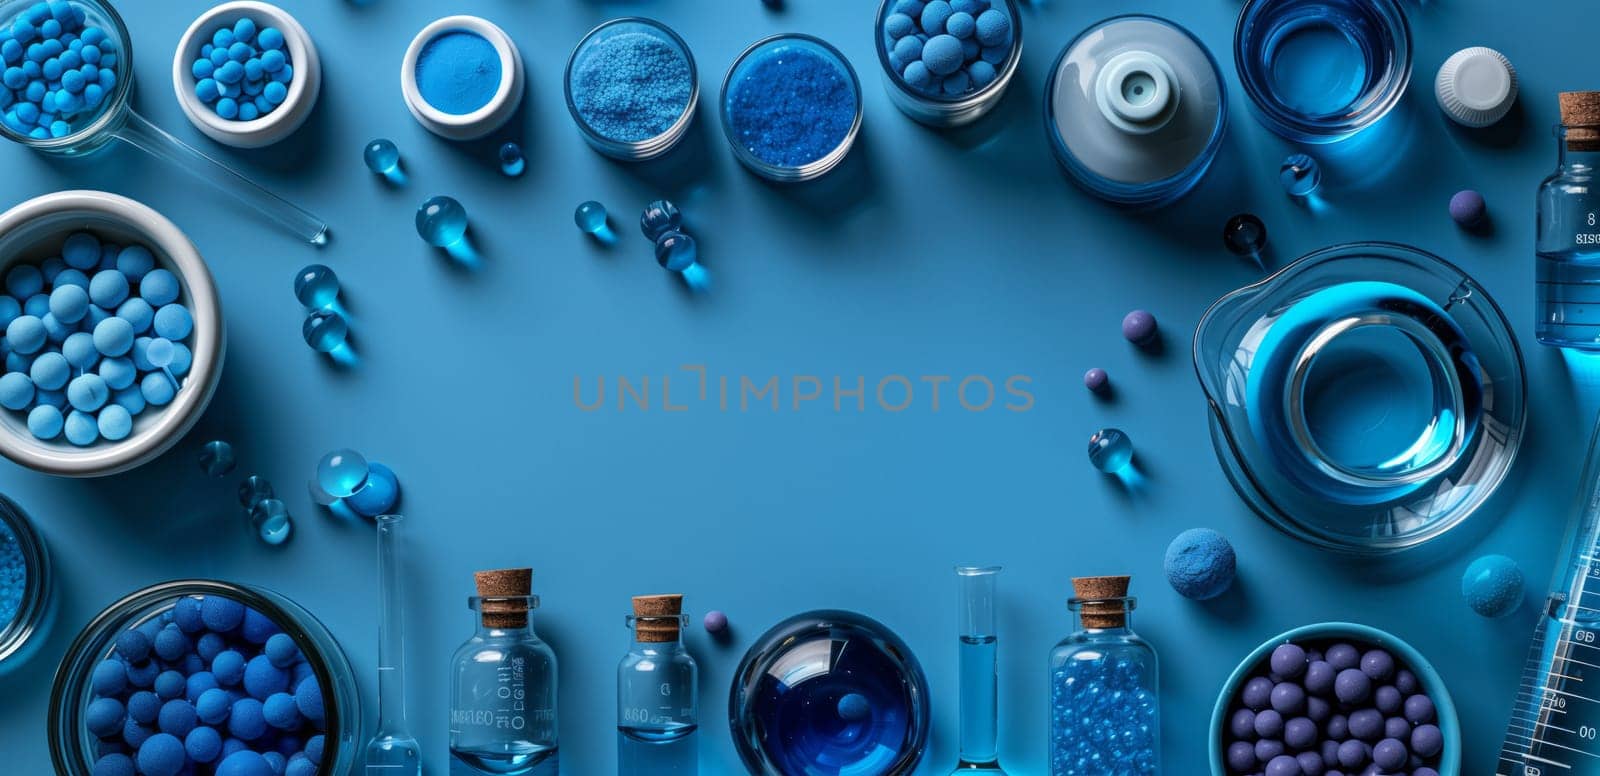 Various azure items displayed against an electric blue backdrop by richwolf